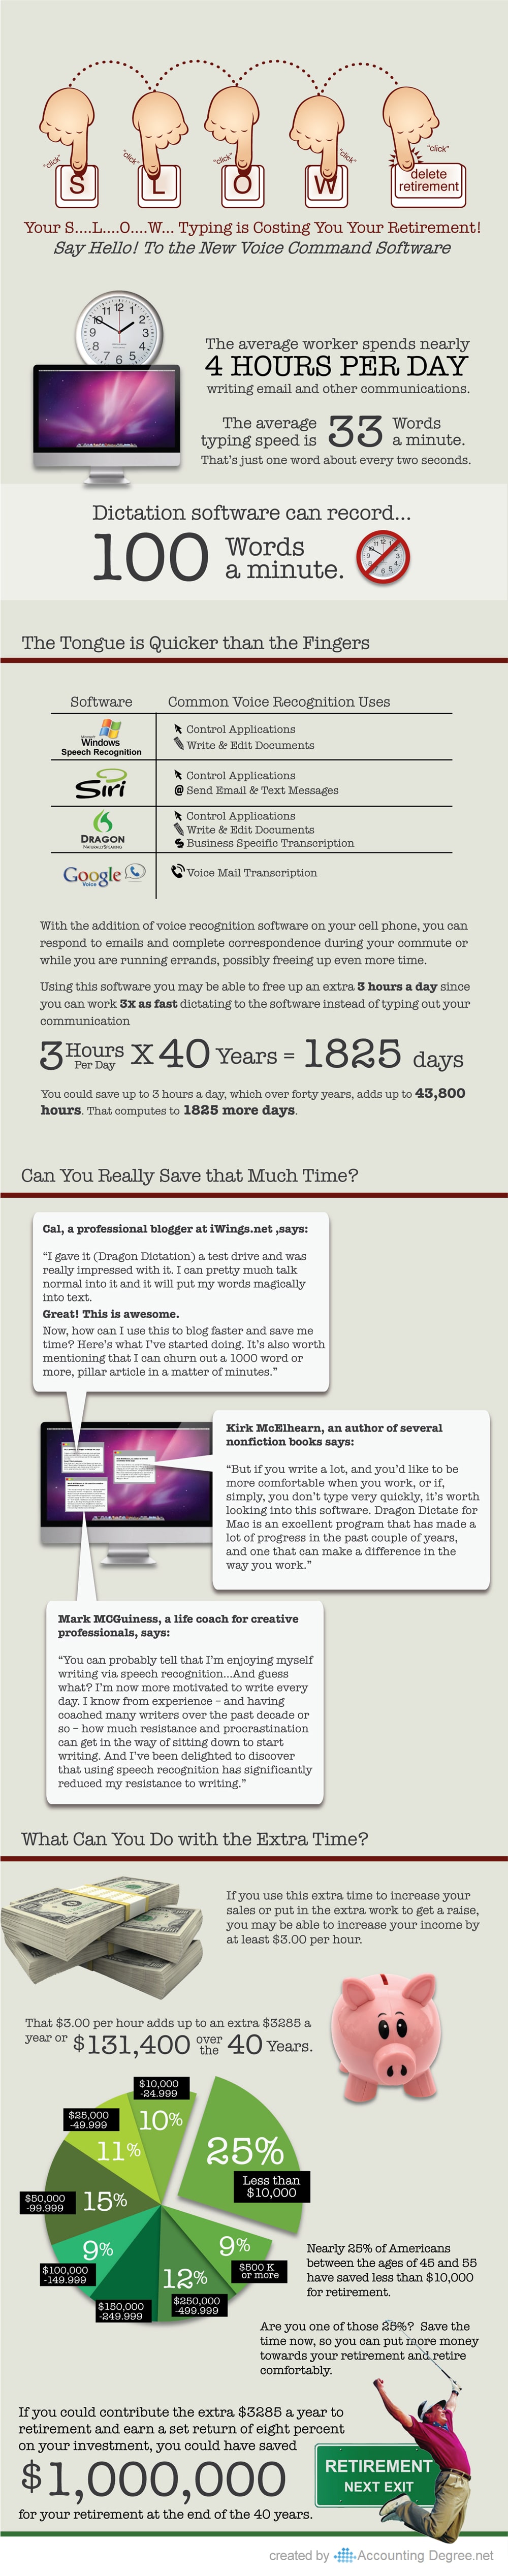 keyboard-typing-speed-improvement-infographic